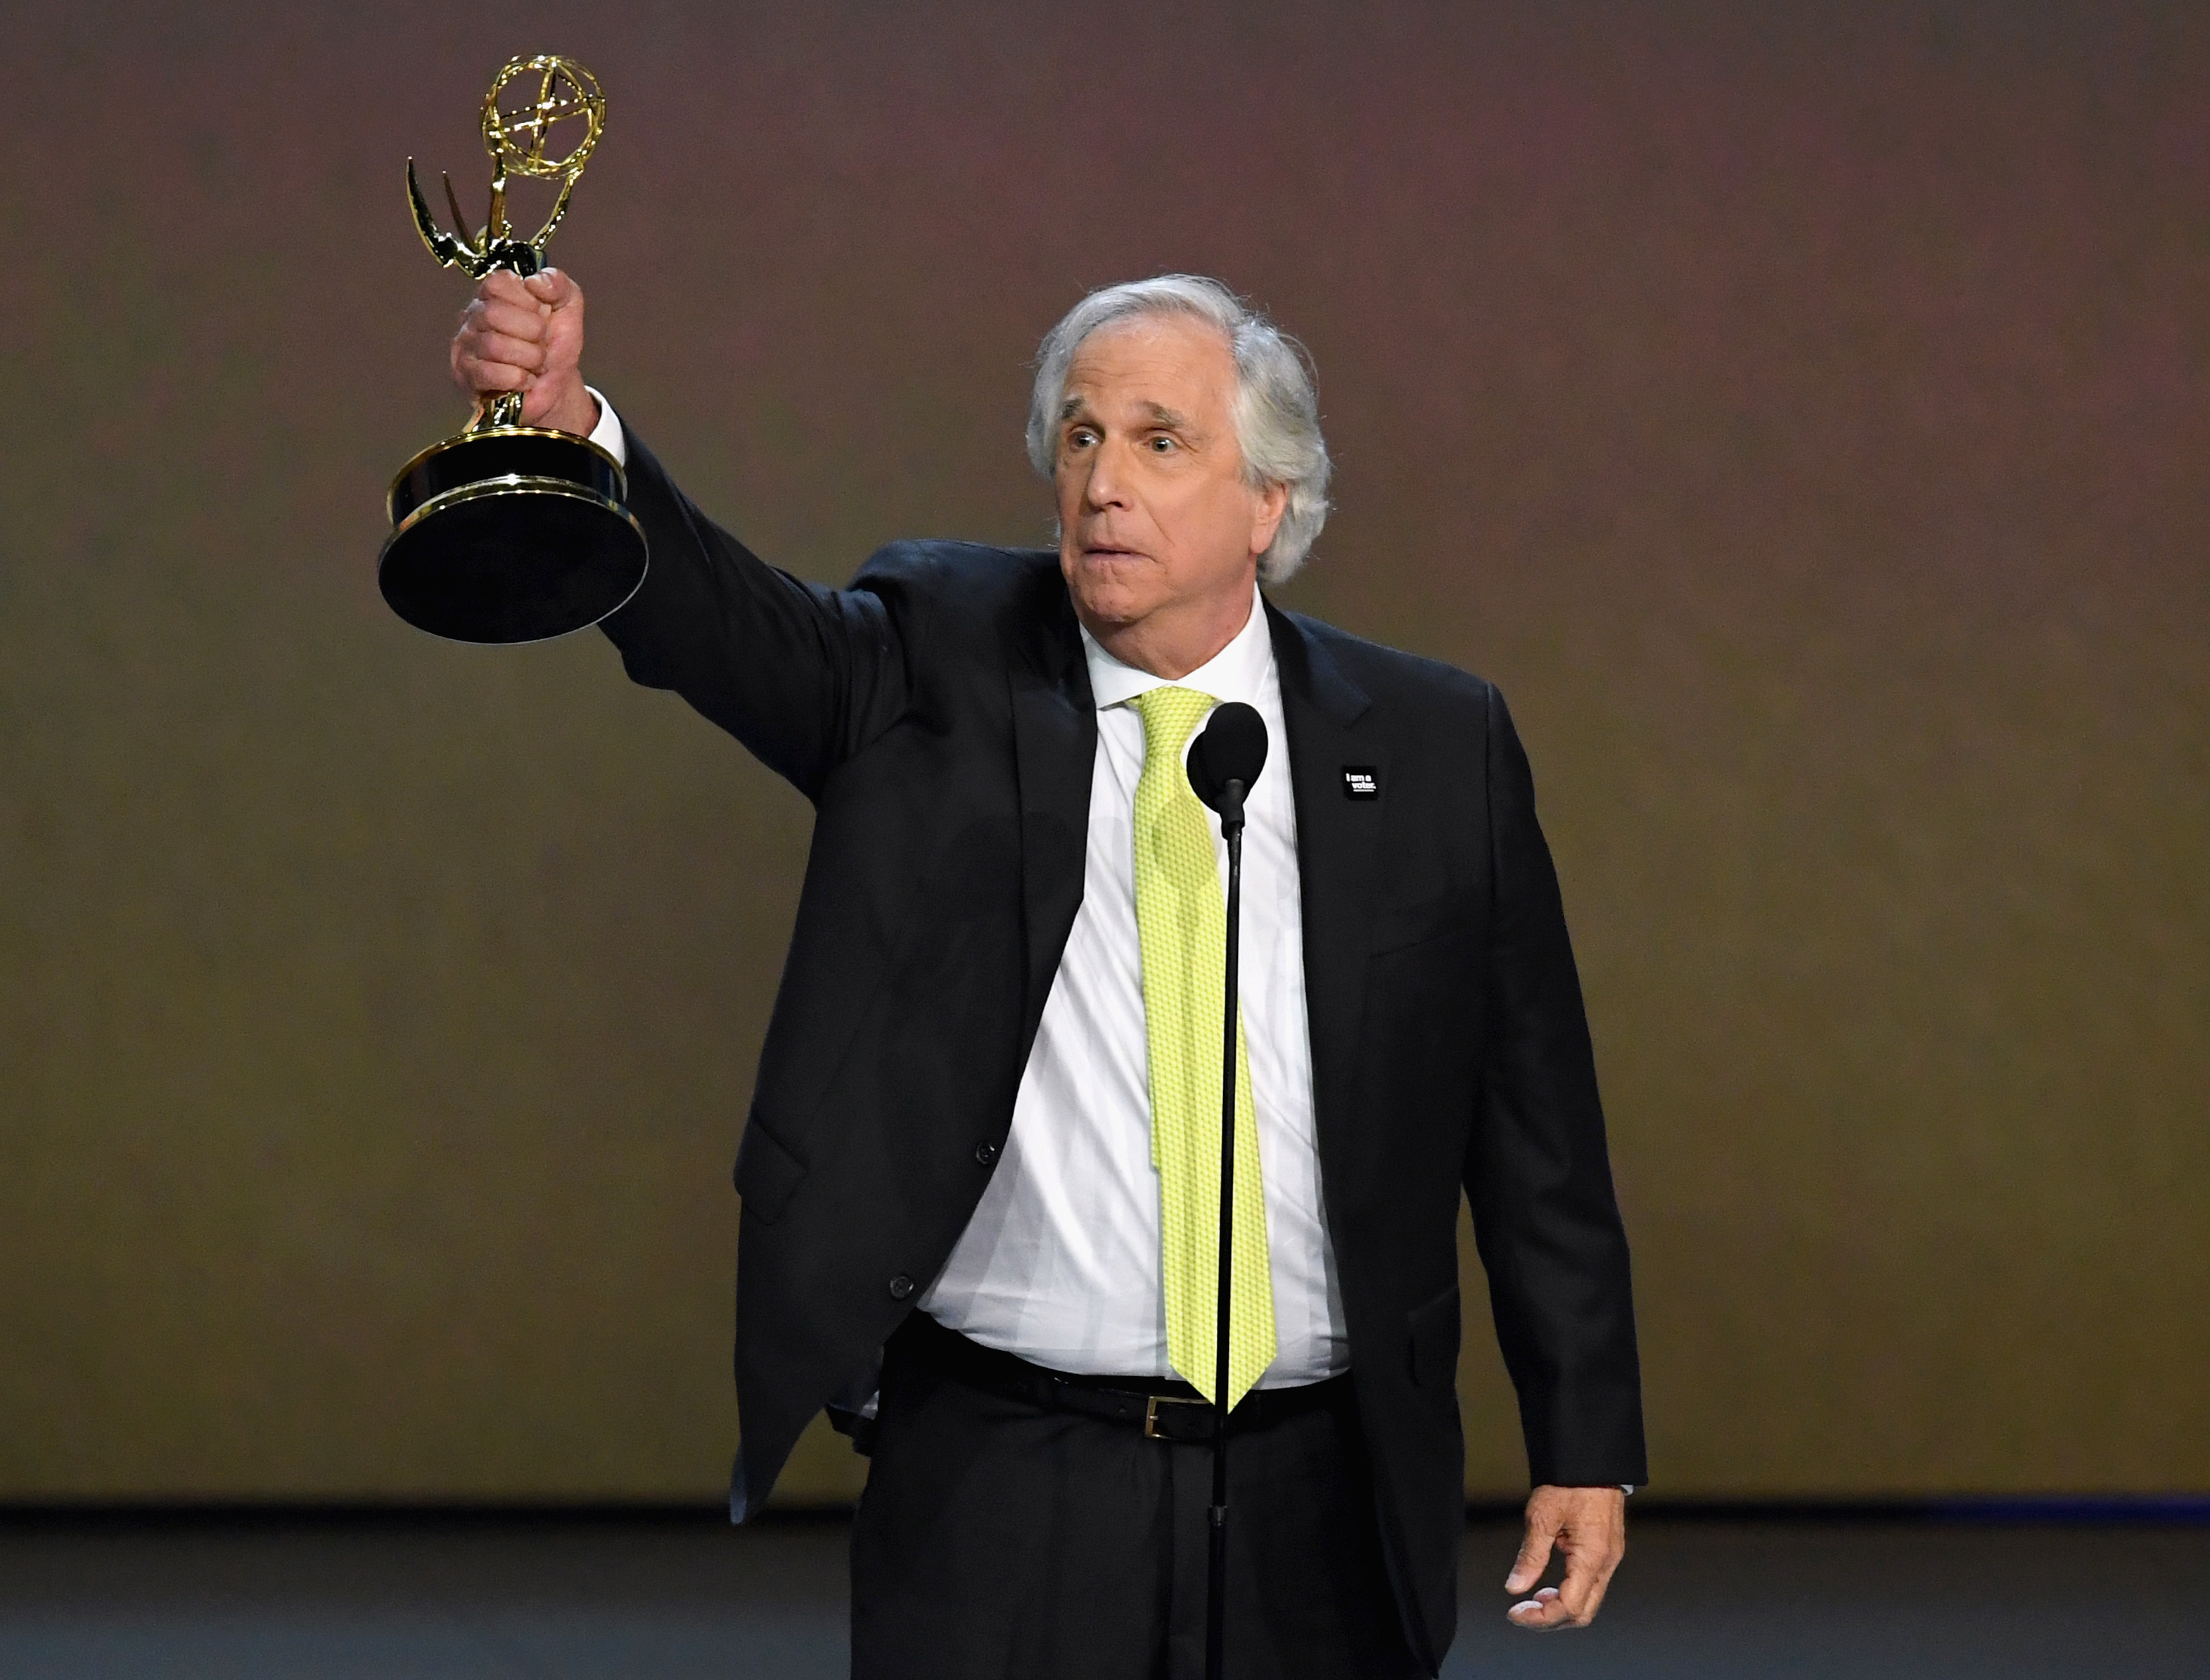 Henry Winkler picks up the win for 'Barry' in the 'Outstanding Supporting Actor in a Comedy Series category at the 70th Emmy Awards